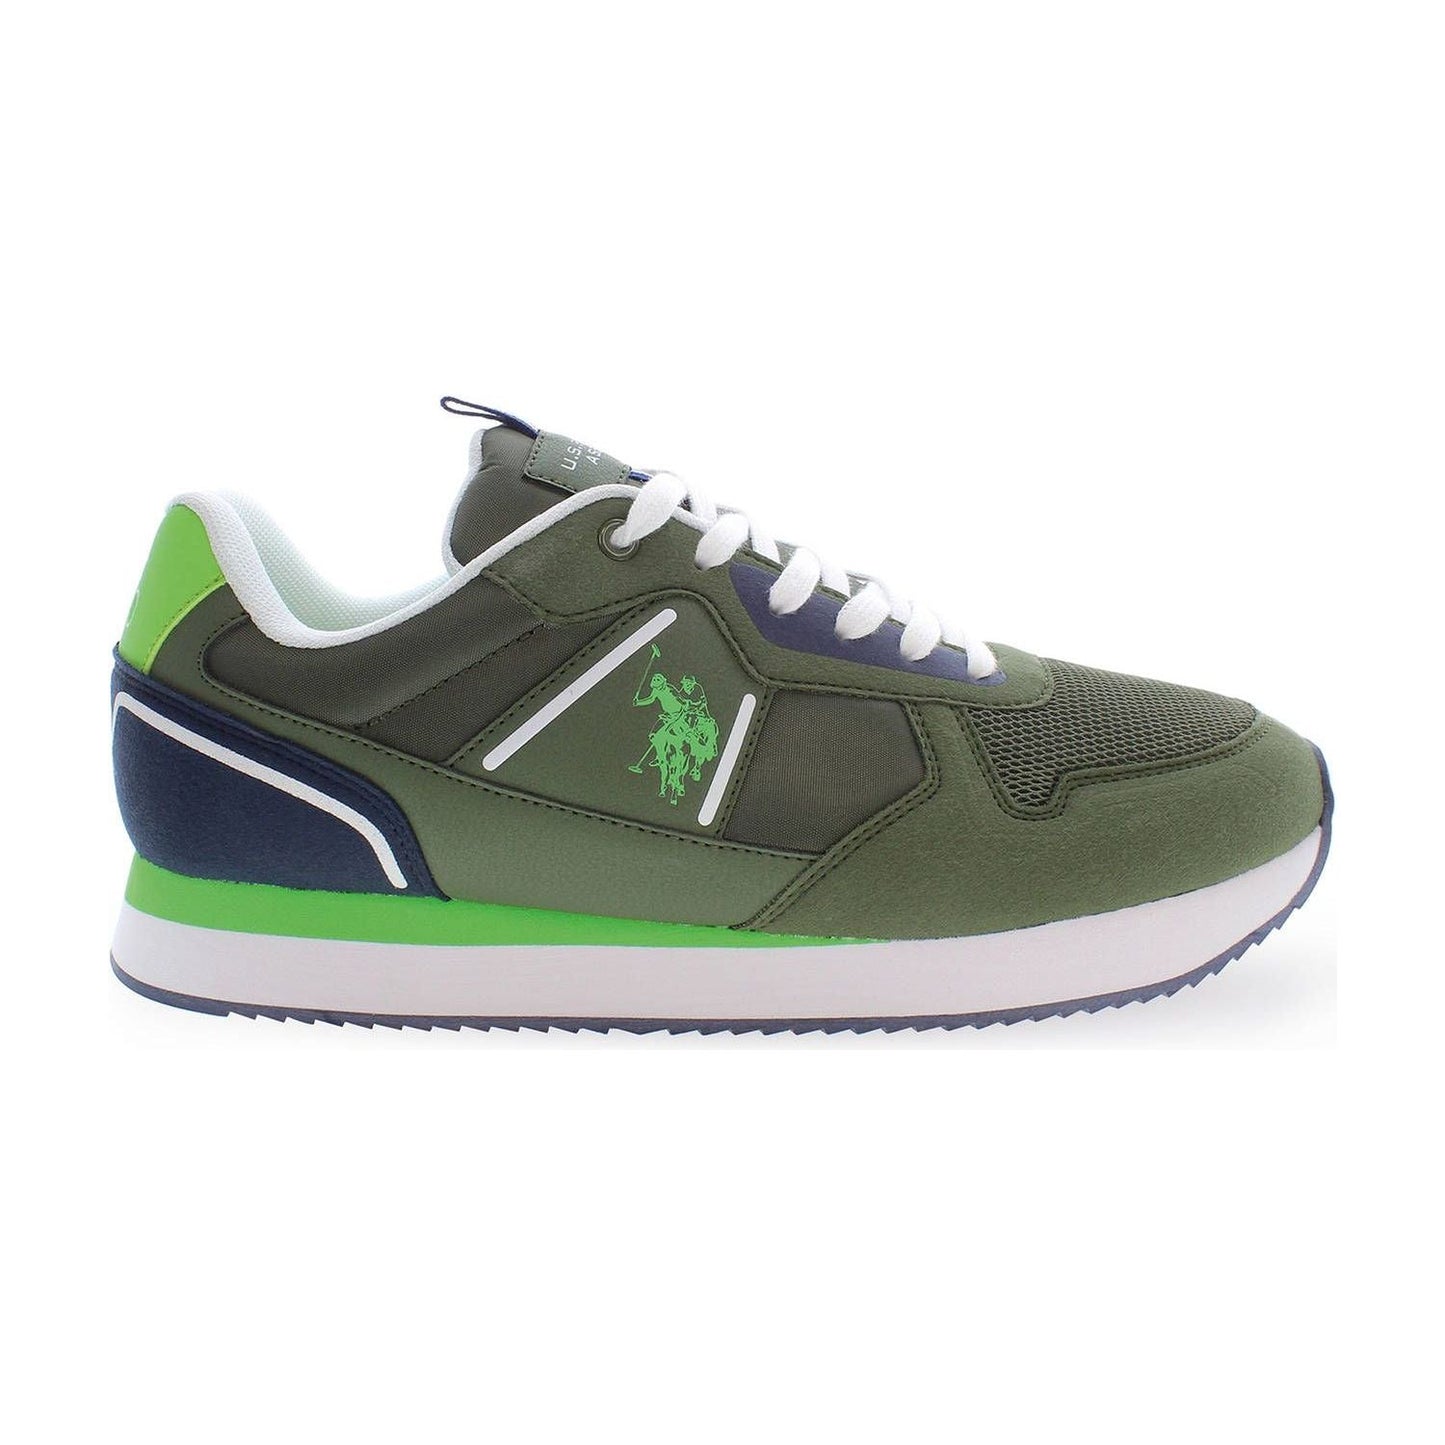 U.S. POLO ASSN. Sleek Green Sneakers with Iconic Logo Detailing sleek-green-sneakers-with-iconic-logo-detailing